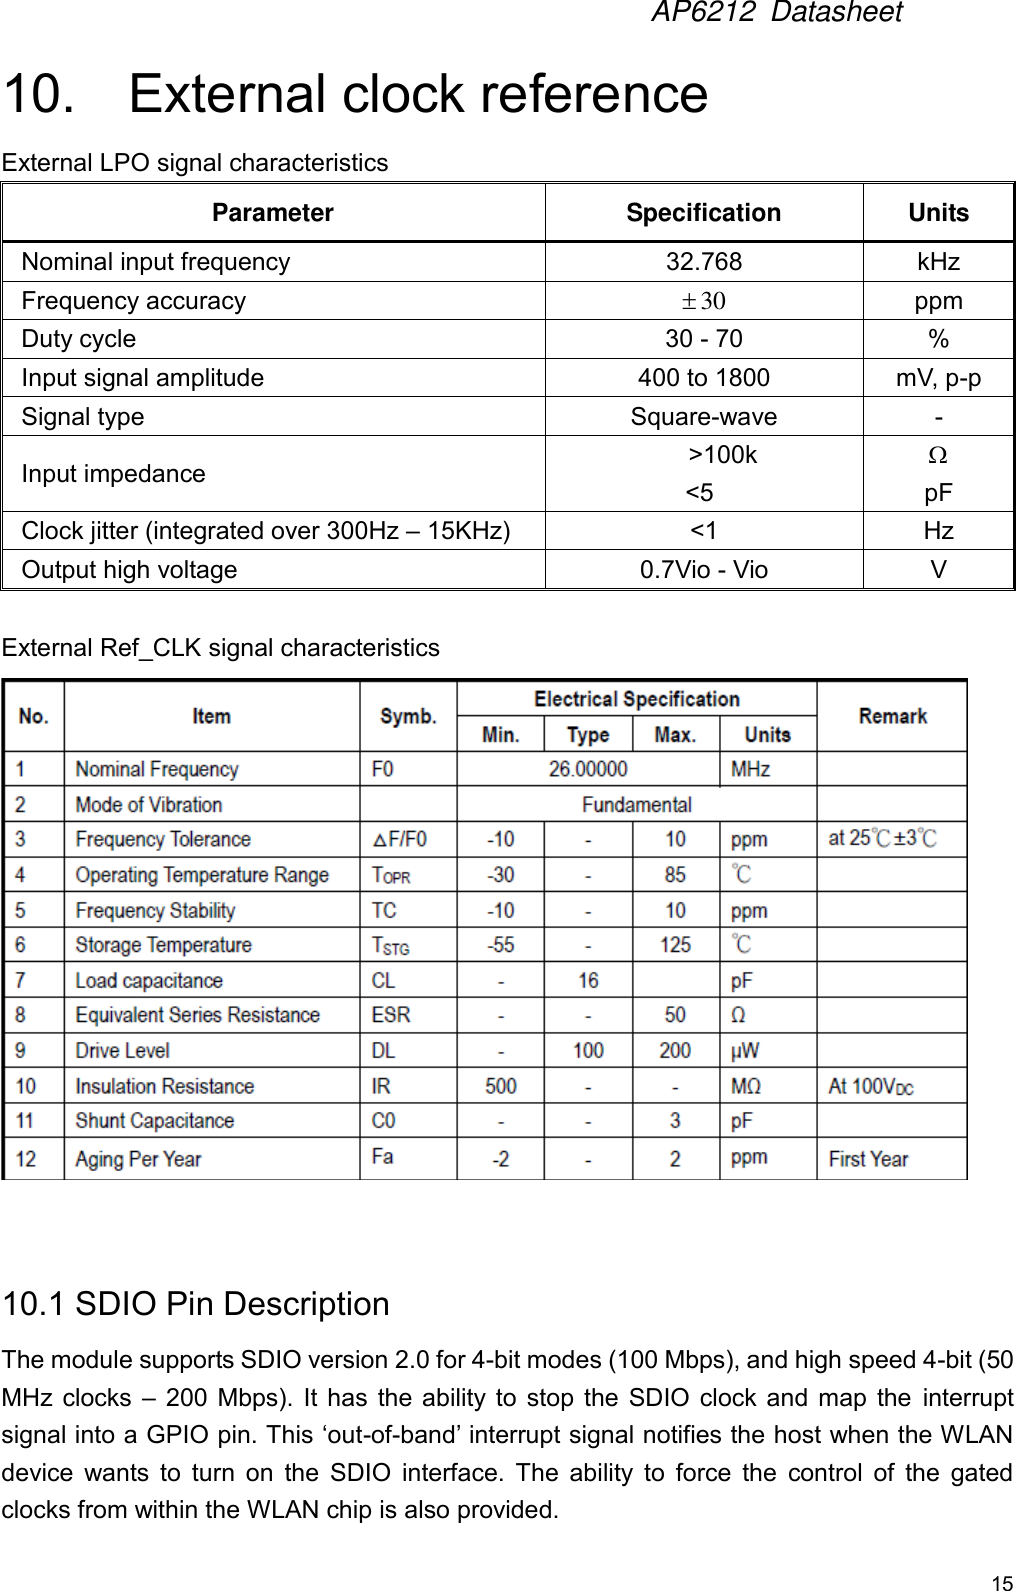 AP6212  Datasheet15 10. External clock referenceExternal LPO signal characteristics Parameter Specification Units Nominal input frequency 32.768 kHz Frequency accuracy 30ppm Duty cycle 30 - 70 % Input signal amplitude 400 to 1800mV, p-p Signal type Square-wave - Input impedance &gt;100k&lt;5 pF Clock jitter (integrated over 300Hz – 15KHz) &lt;1 Hz Output high voltage 0.7Vio - Vio V External Ref_CLK signal characteristics 10.1 SDIO Pin Description The module supports SDIO version 2.0 for 4-bit modes (100 Mbps), and high speed 4-bit (50 MHz clocks  –  200 Mbps). It  has the  ability  to stop  the SDIO  clock and  map the interrupt signal into a GPIO pin. This ‘out-of-band’ interrupt signal notifies the host when the WLAN device  wants  to  turn  on  the  SDIO  interface.  The  ability  to  force  the  control  of  the  gated clocks from within the WLAN chip is also provided. 